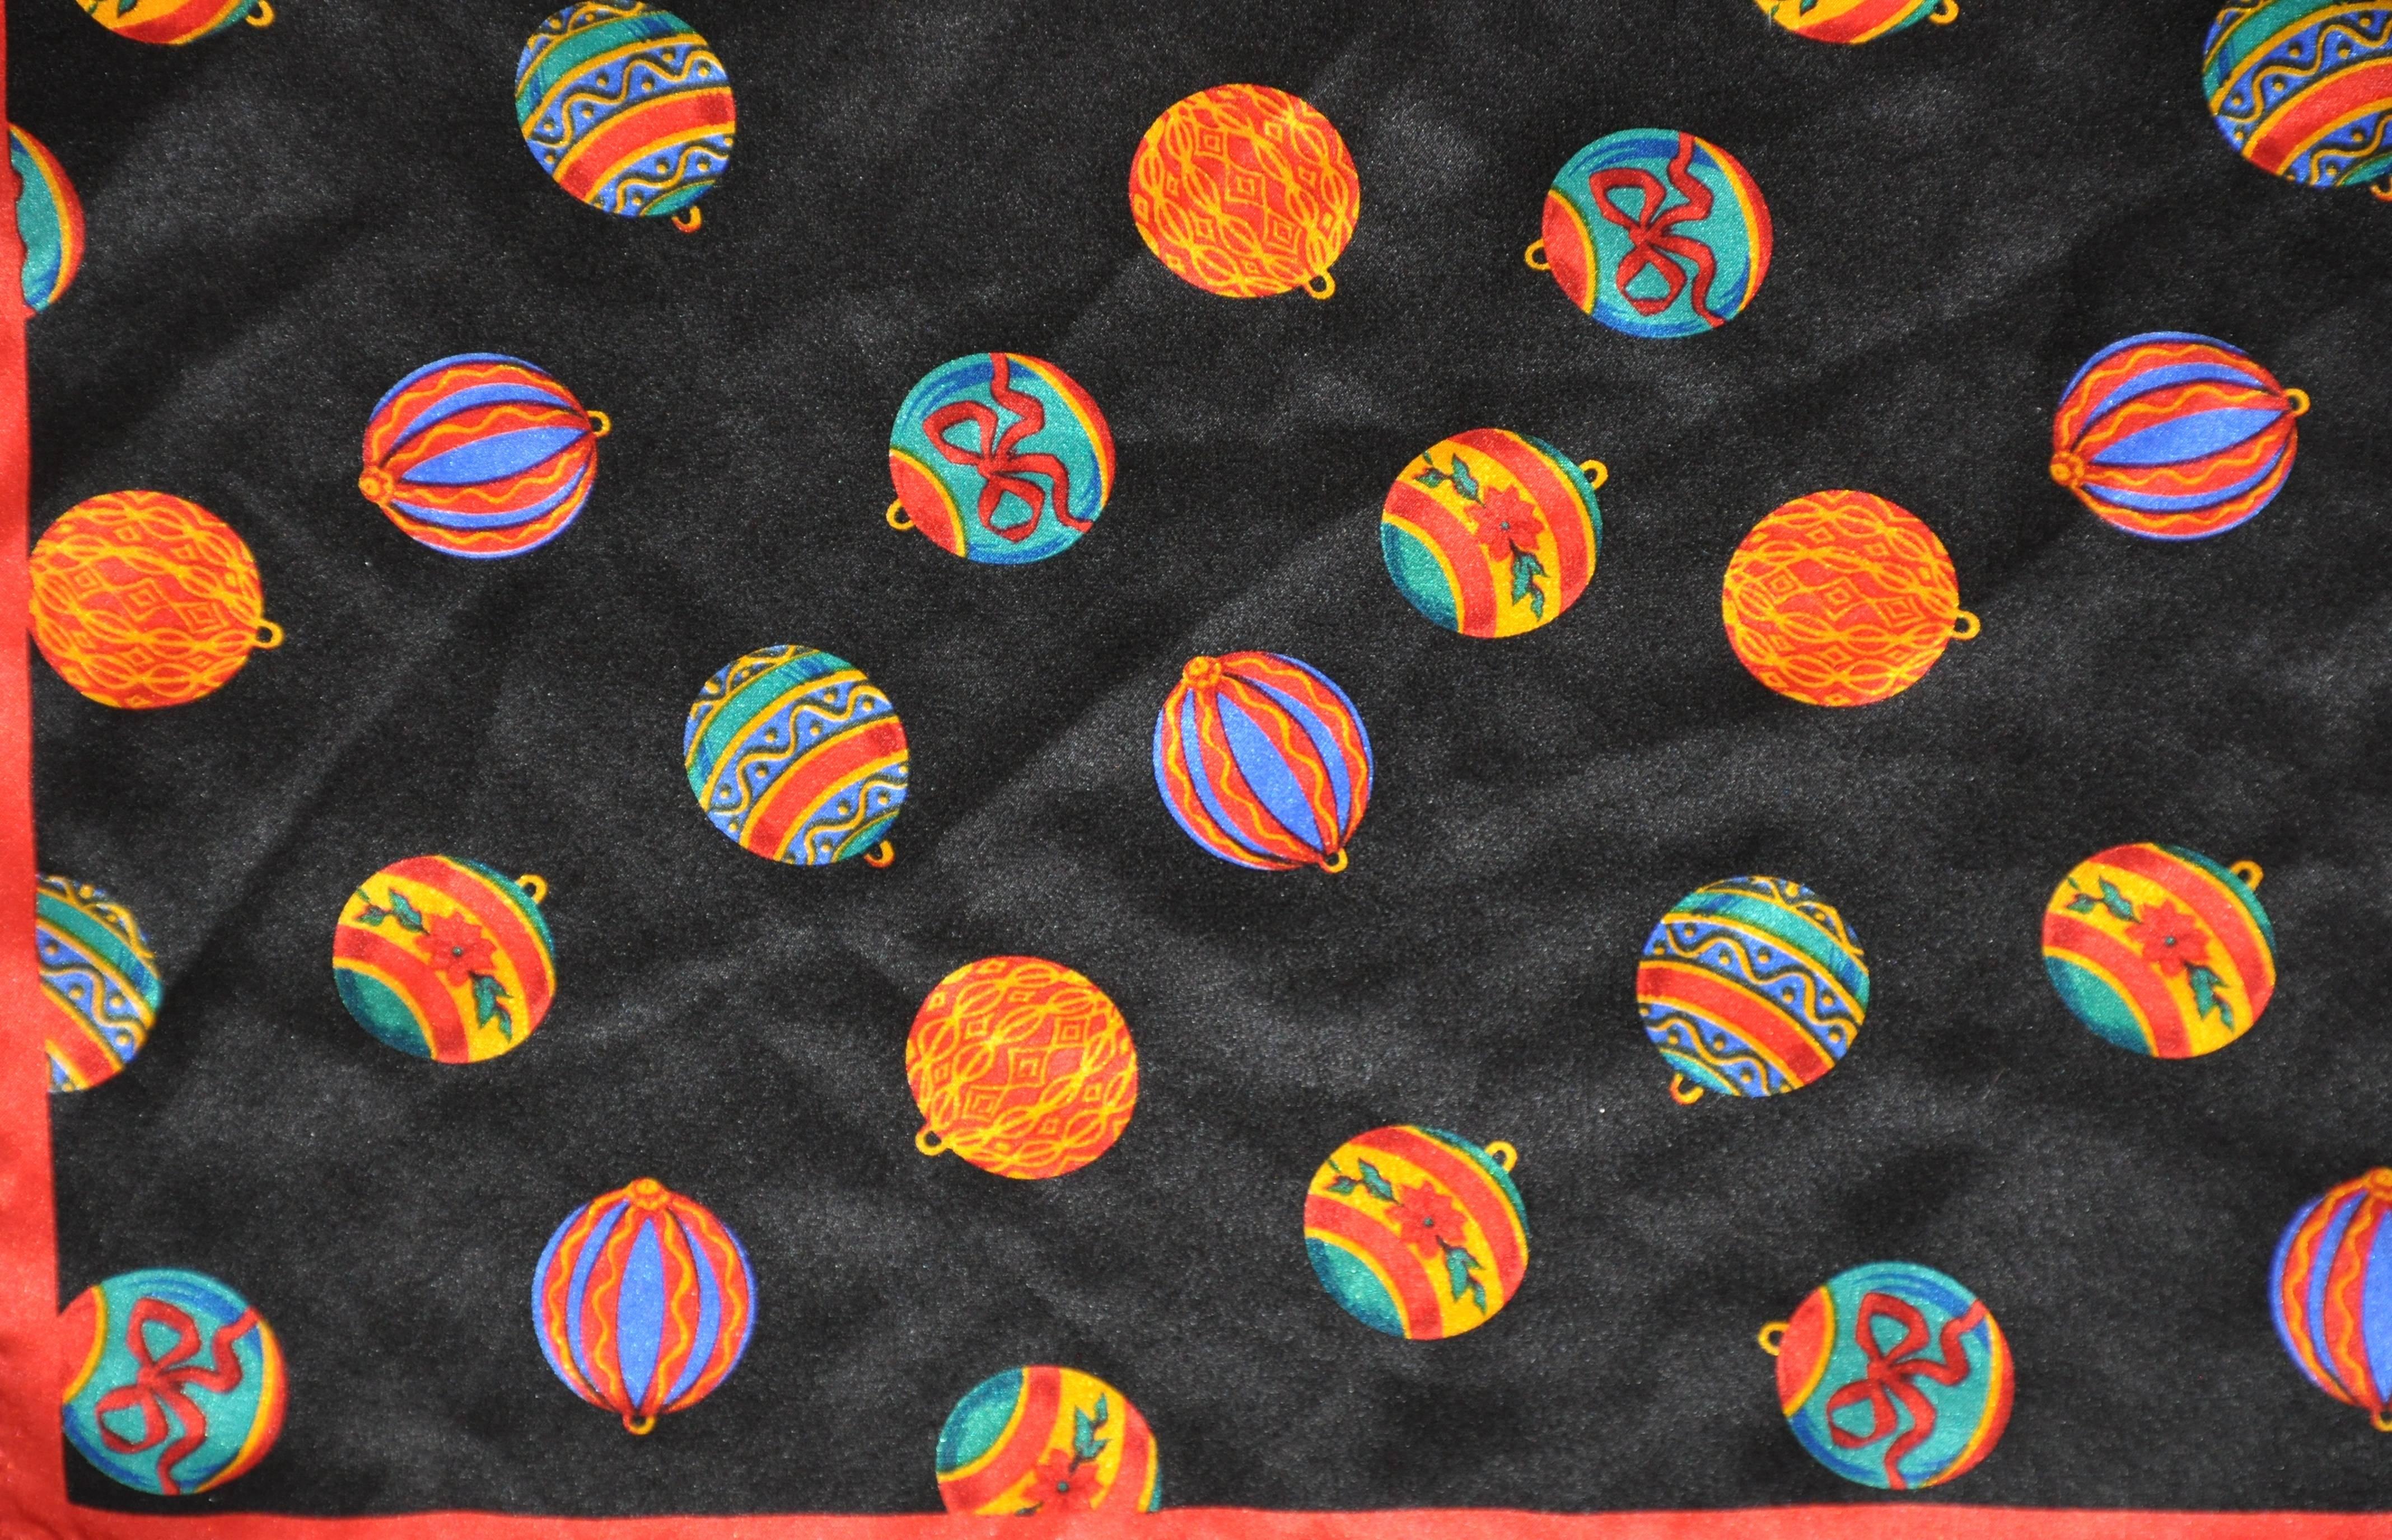      This wonderfully elegant "Collection of Christmas Balls" silk scarf measures 20 1/2" x 20 1/2" and made in Italy.